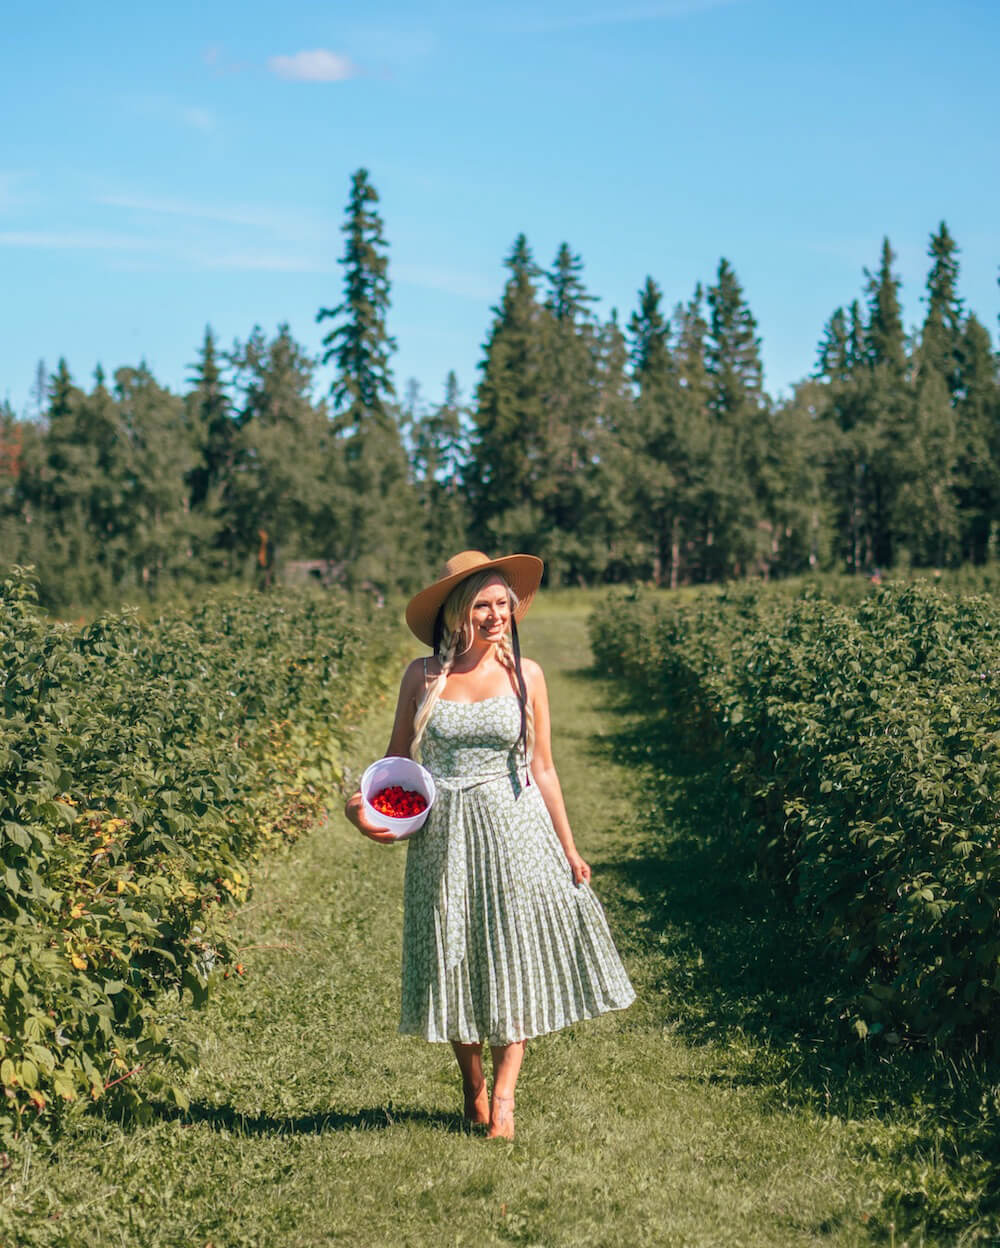 Looking for some fun things to do in Edmonton this summer? This guide includes all sorts of family friendly activities for you to try out! Whether you're looking for free things to do in Edmonton or you're ok with spending a little on activities, this guide has both free and paid ideas for you to check out this year. Picture here: Go raspberry picking at Horse Hill Berry Farm